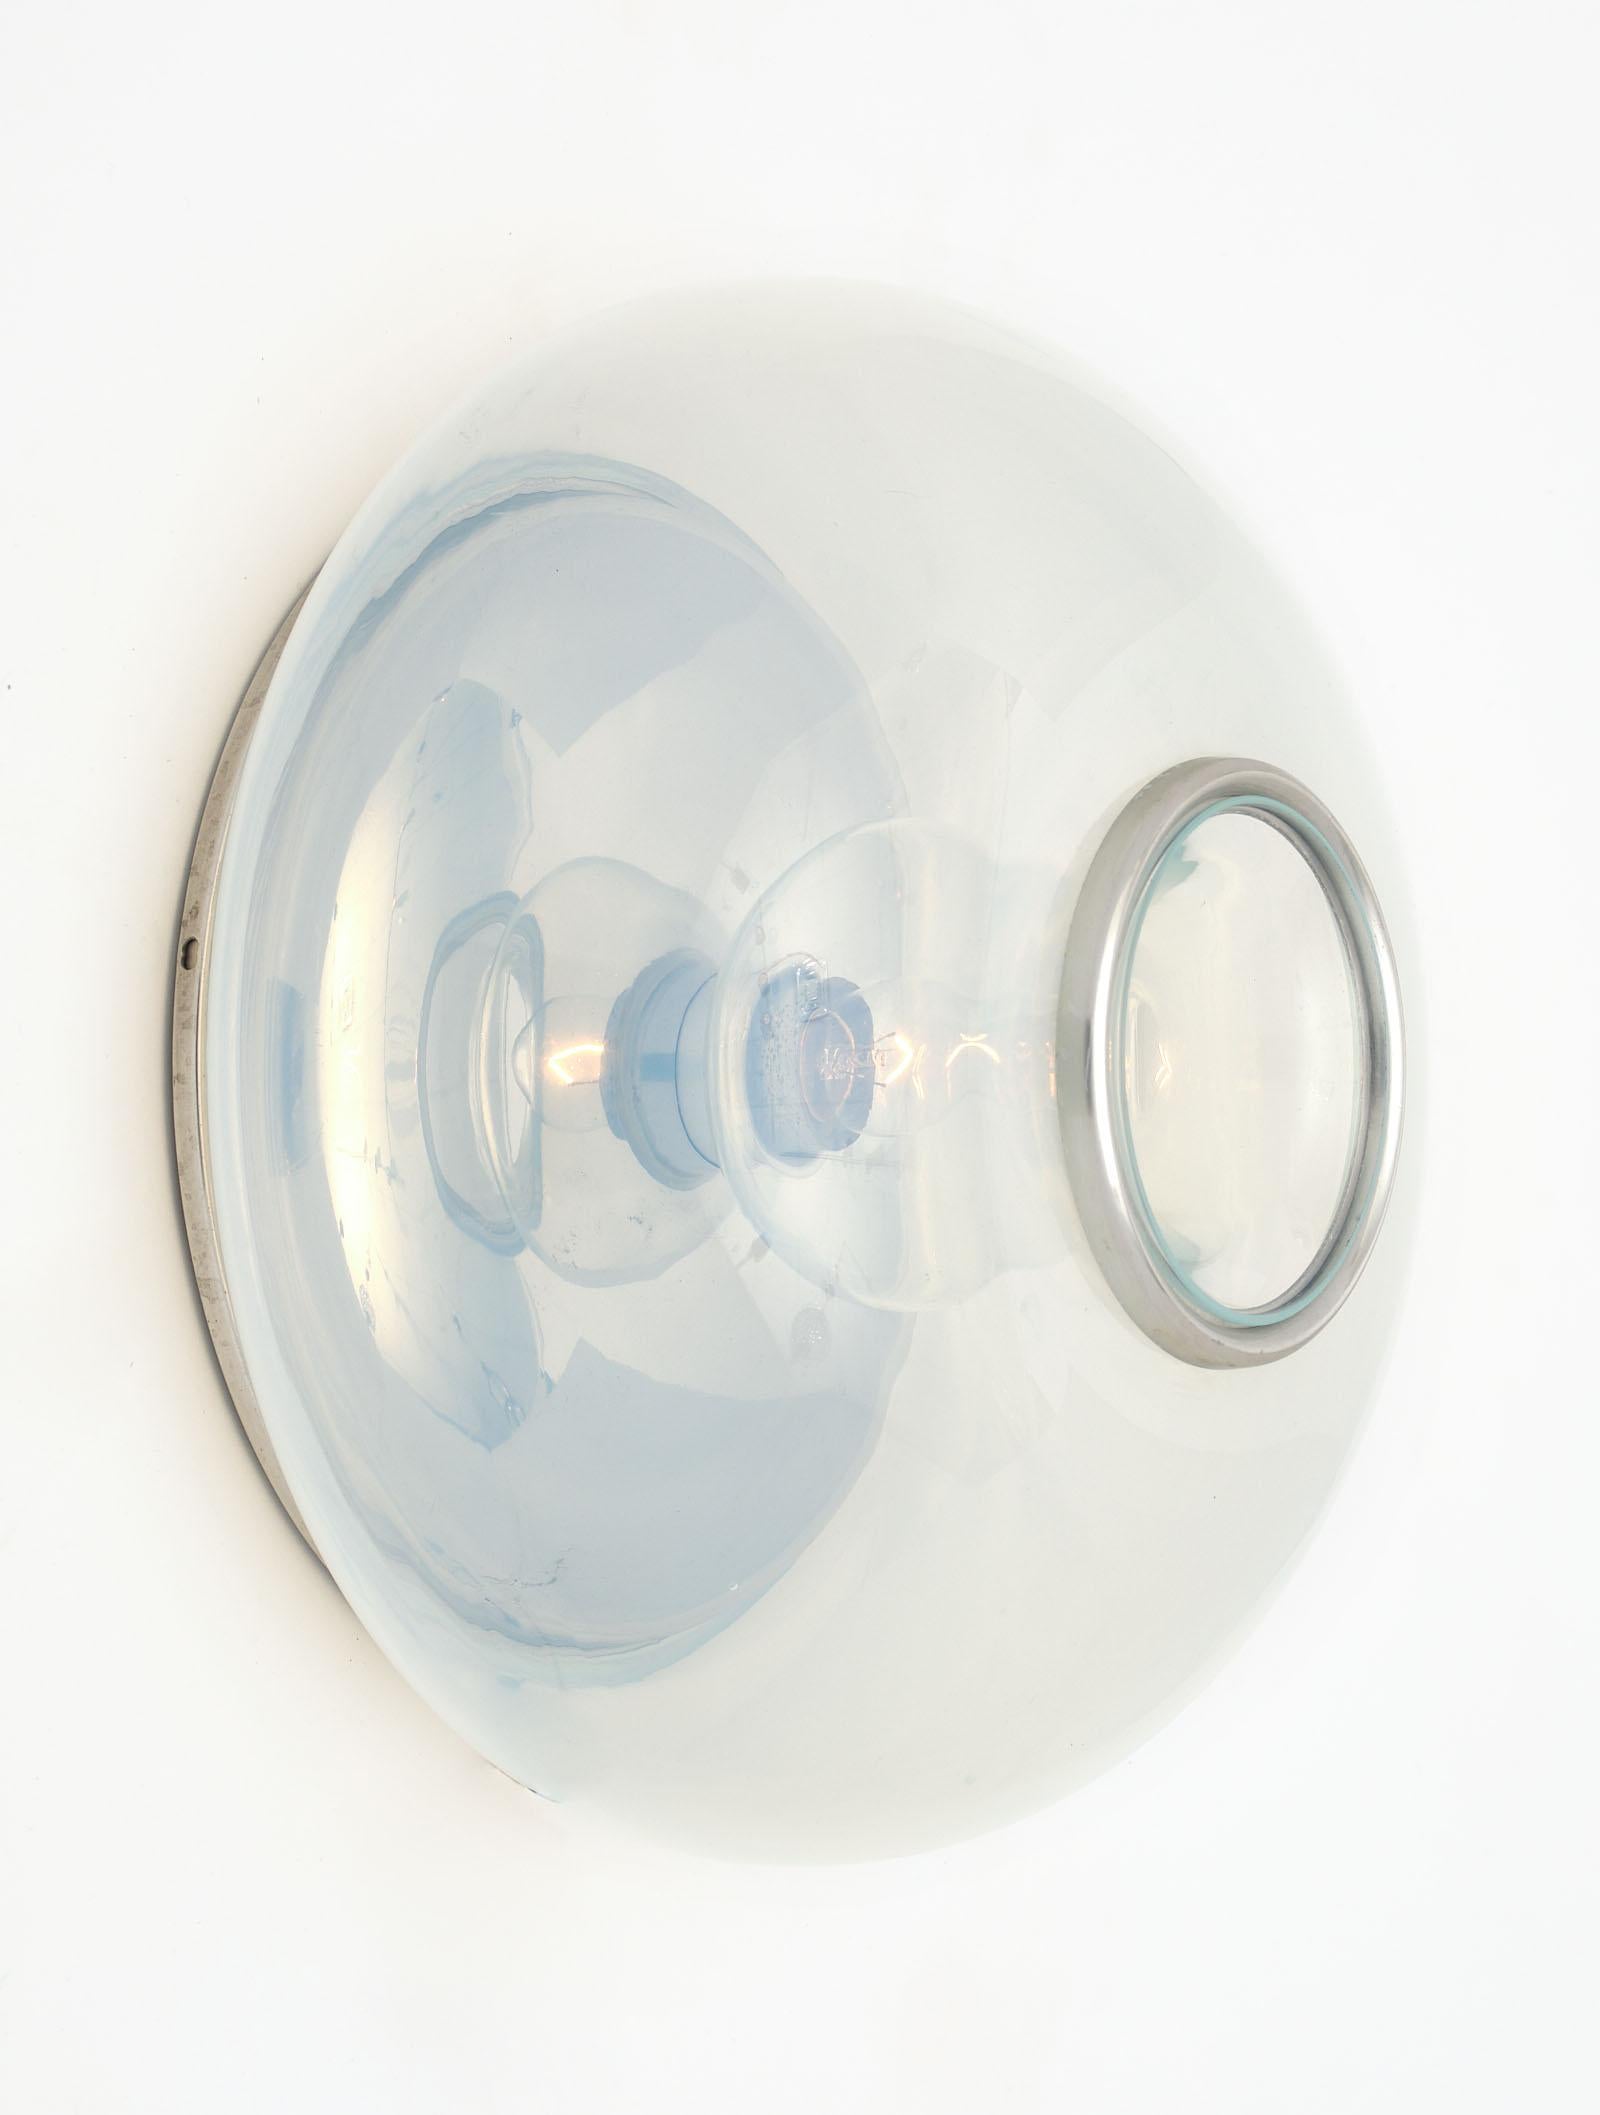 Chrome and glass sconces by Giuliana Gramigna in a clear; iridescent color. Each hand blown fixture centers a bulb surrounded by chrome trim. It is backed with a chrome plate. They have been newly wired to fit US standards.